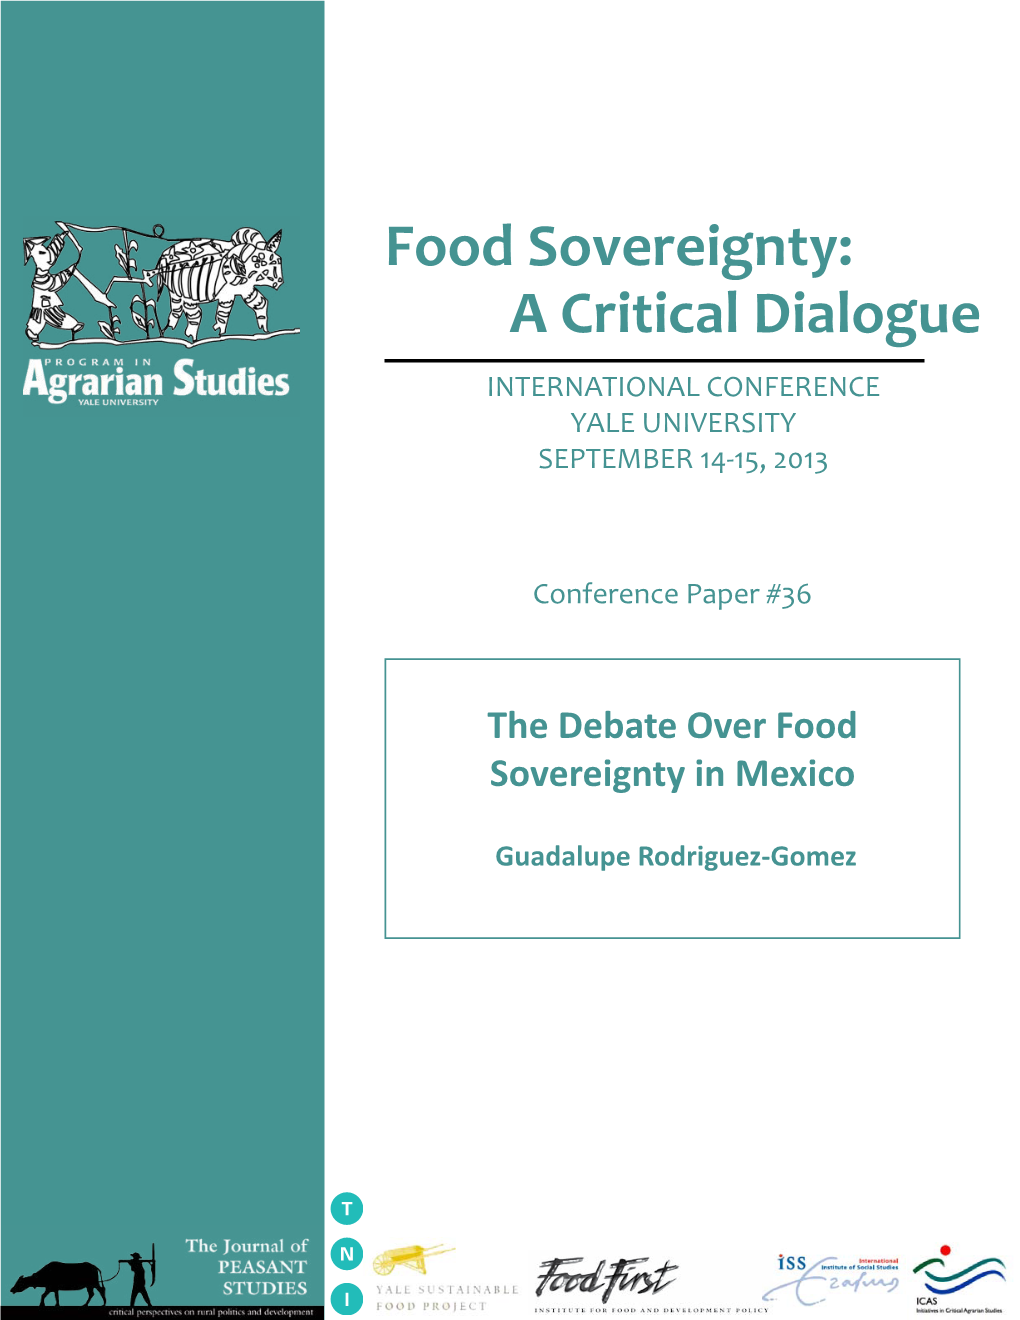 The Debate Over Food Sovereignty in Mexico